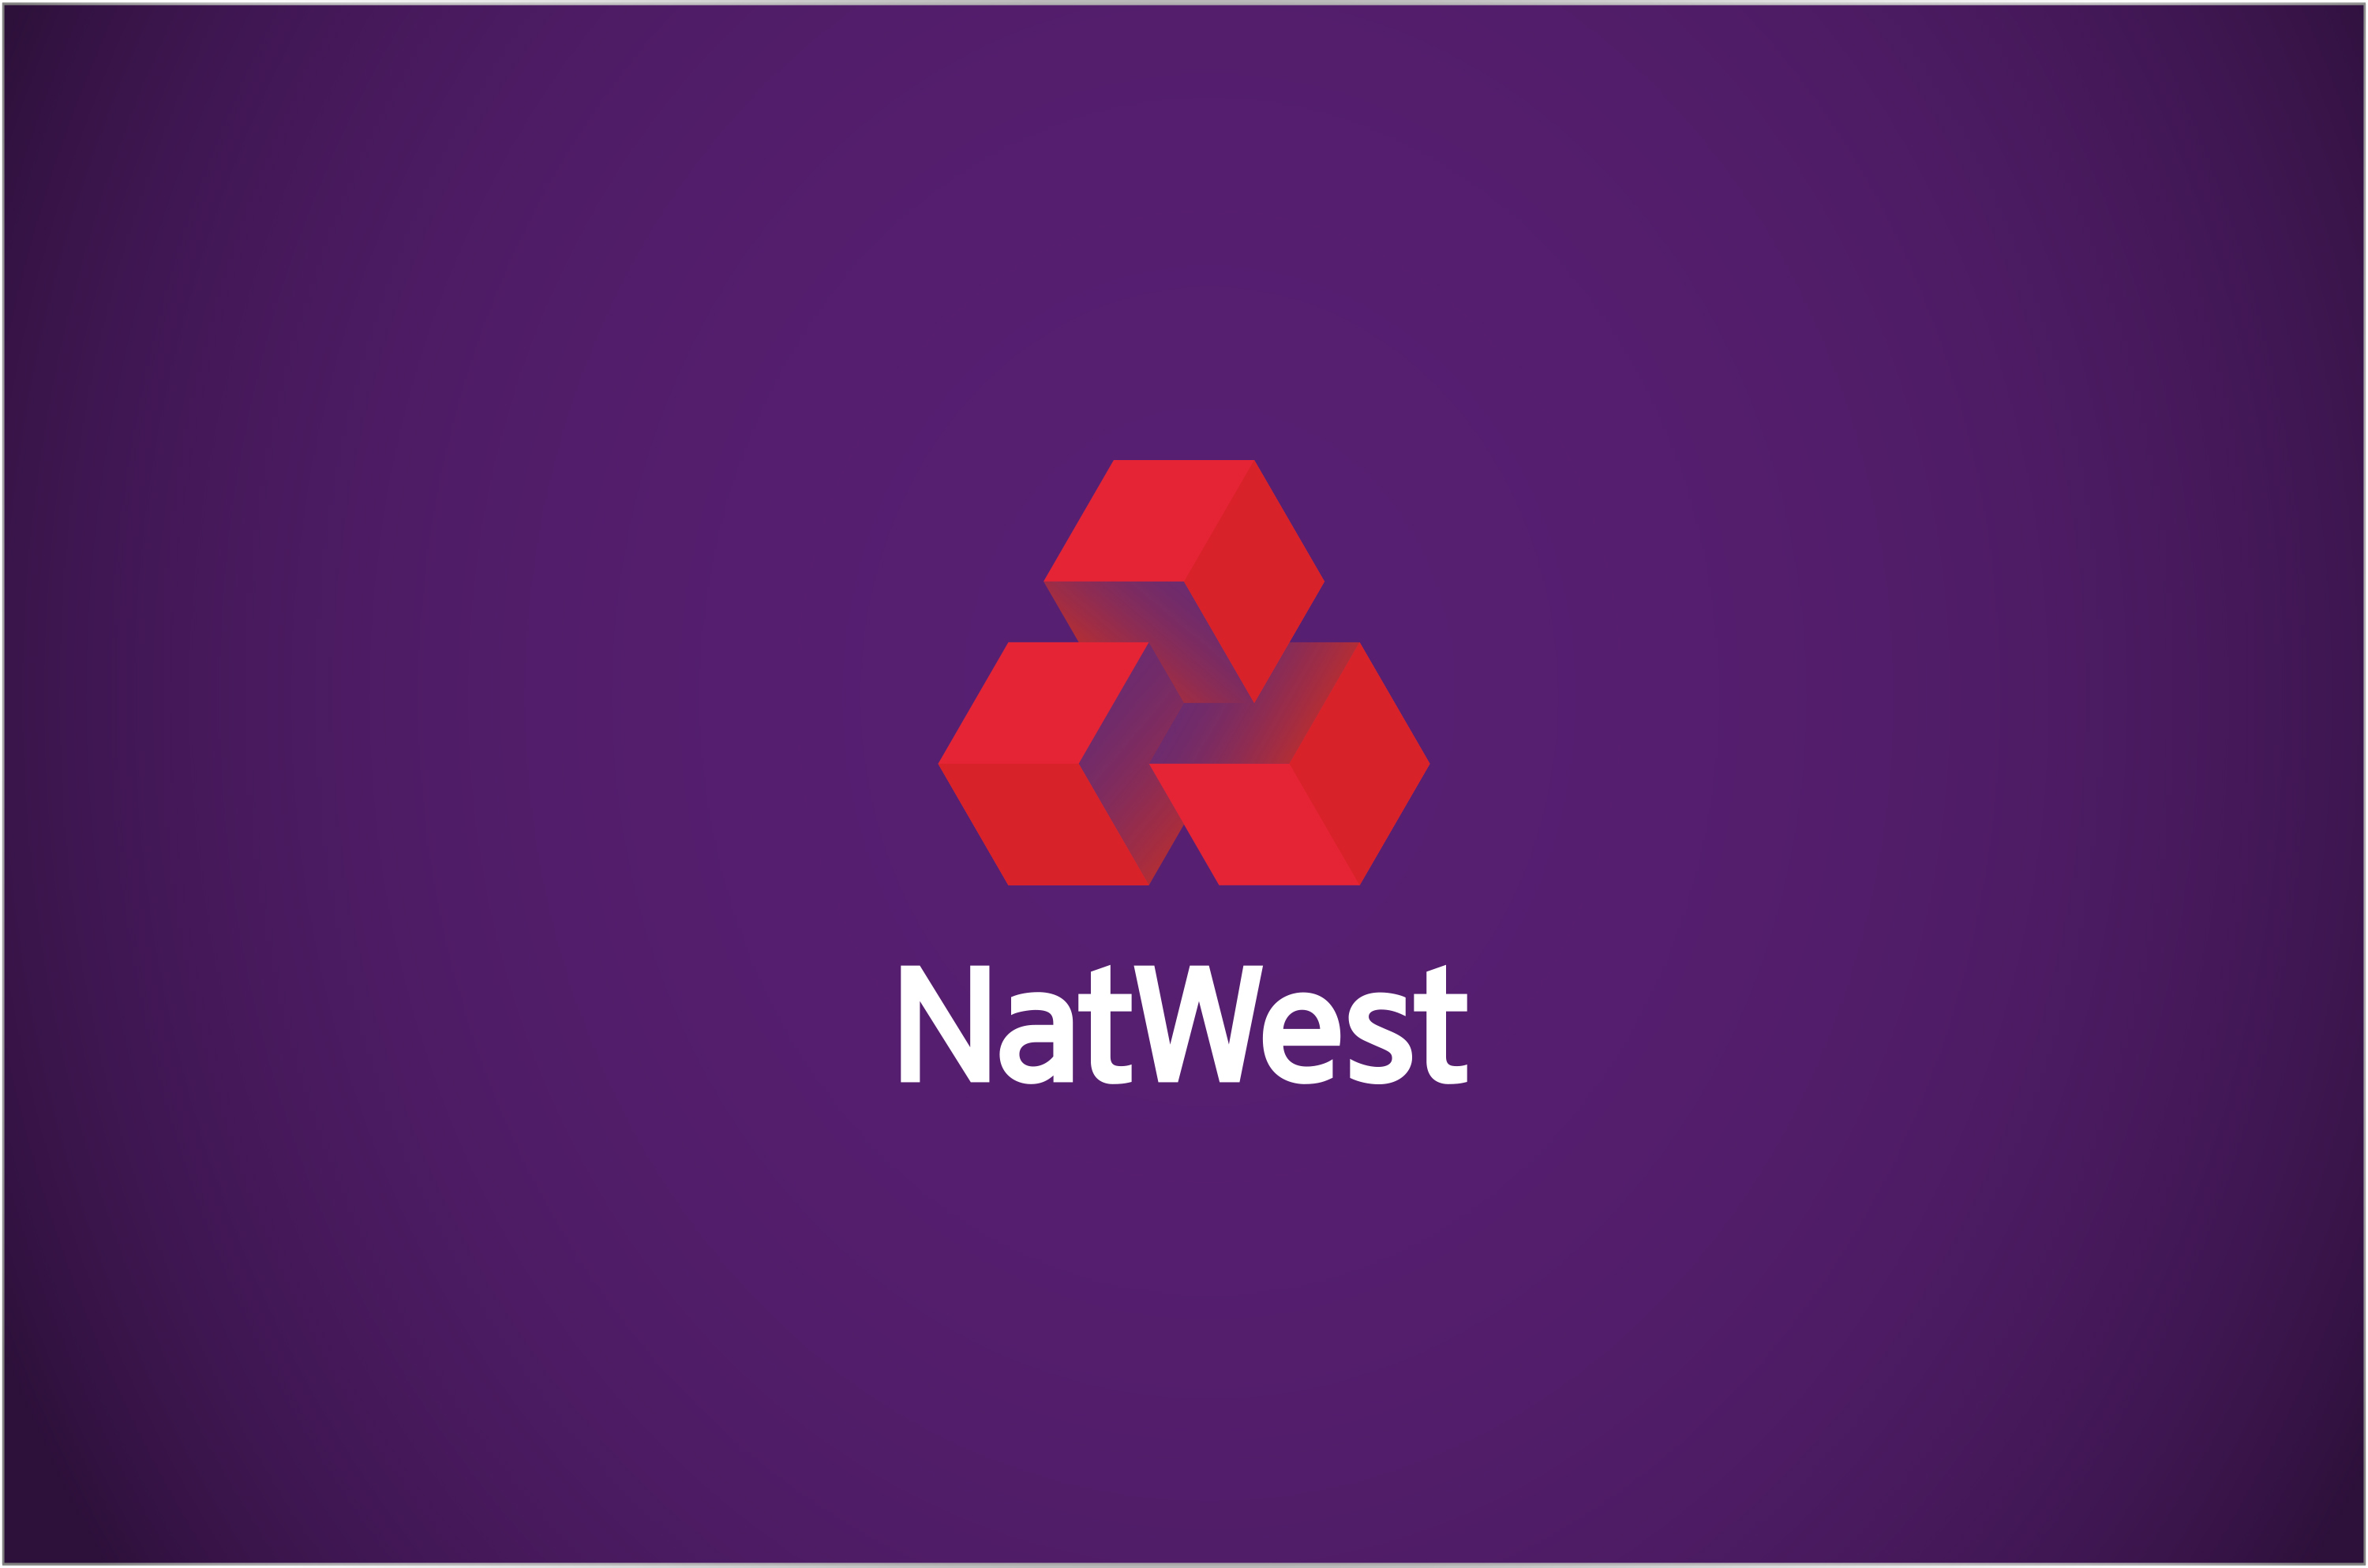 NatWest First UK Bank to Unveil Biometric Credit Card